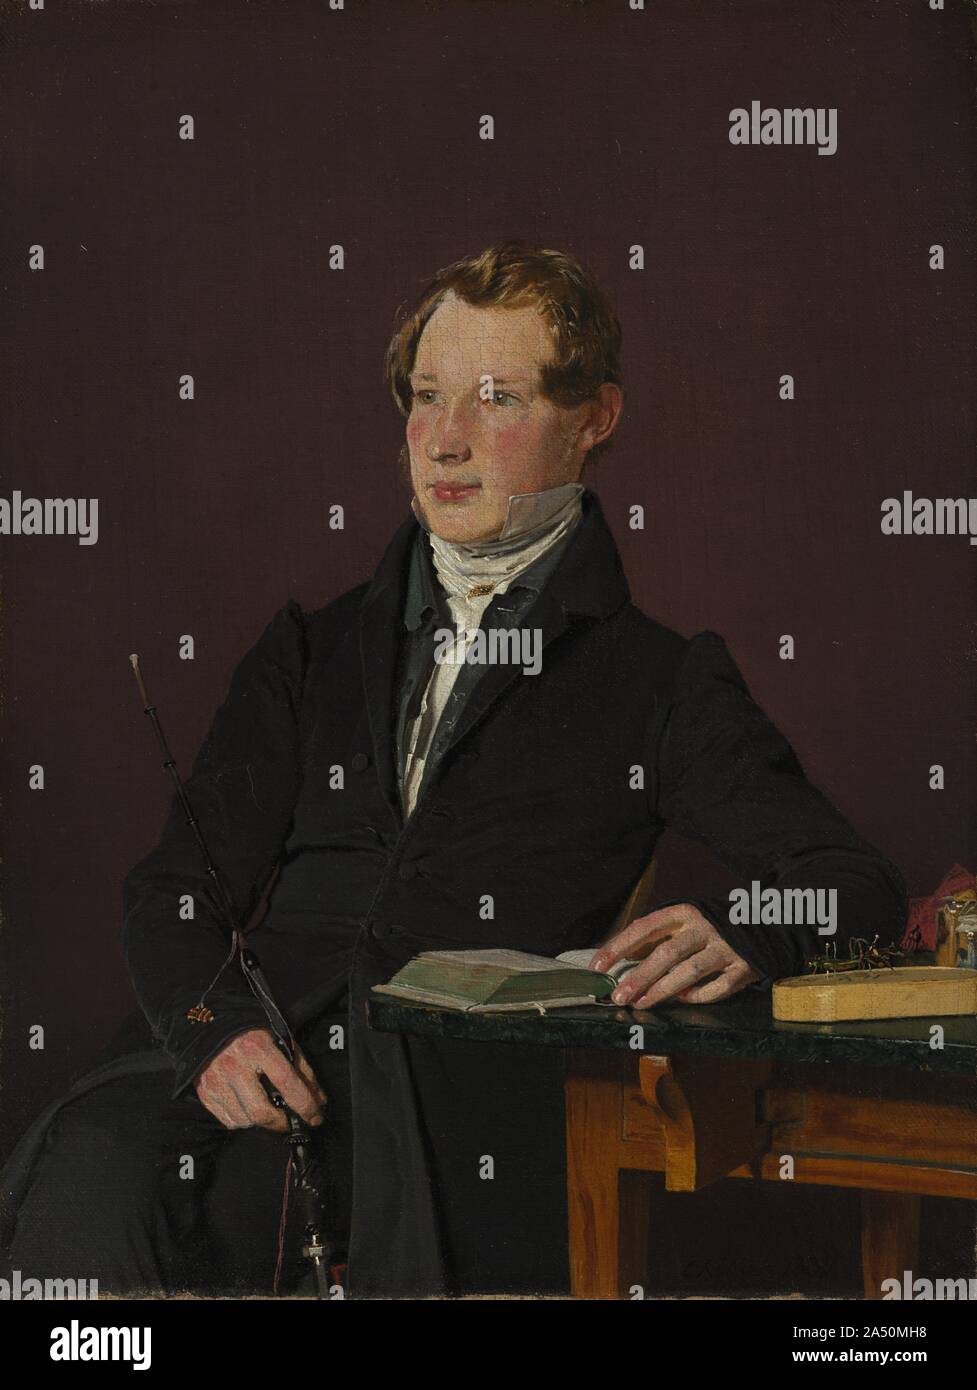 Dr. Johann Henning Kjetil Hjardemaal, 1833. The sitter (1812-1844) was born on the island of Saint Thomas, at that time a colony in the Danish West Indies. He was sent to Copenhagen to study medicine and later set up practice at Satrup in Schleswig, then part of Denmark. For health reasons, he returned with his wife to the Virgin Islands, where they both died in 1844. Stock Photo